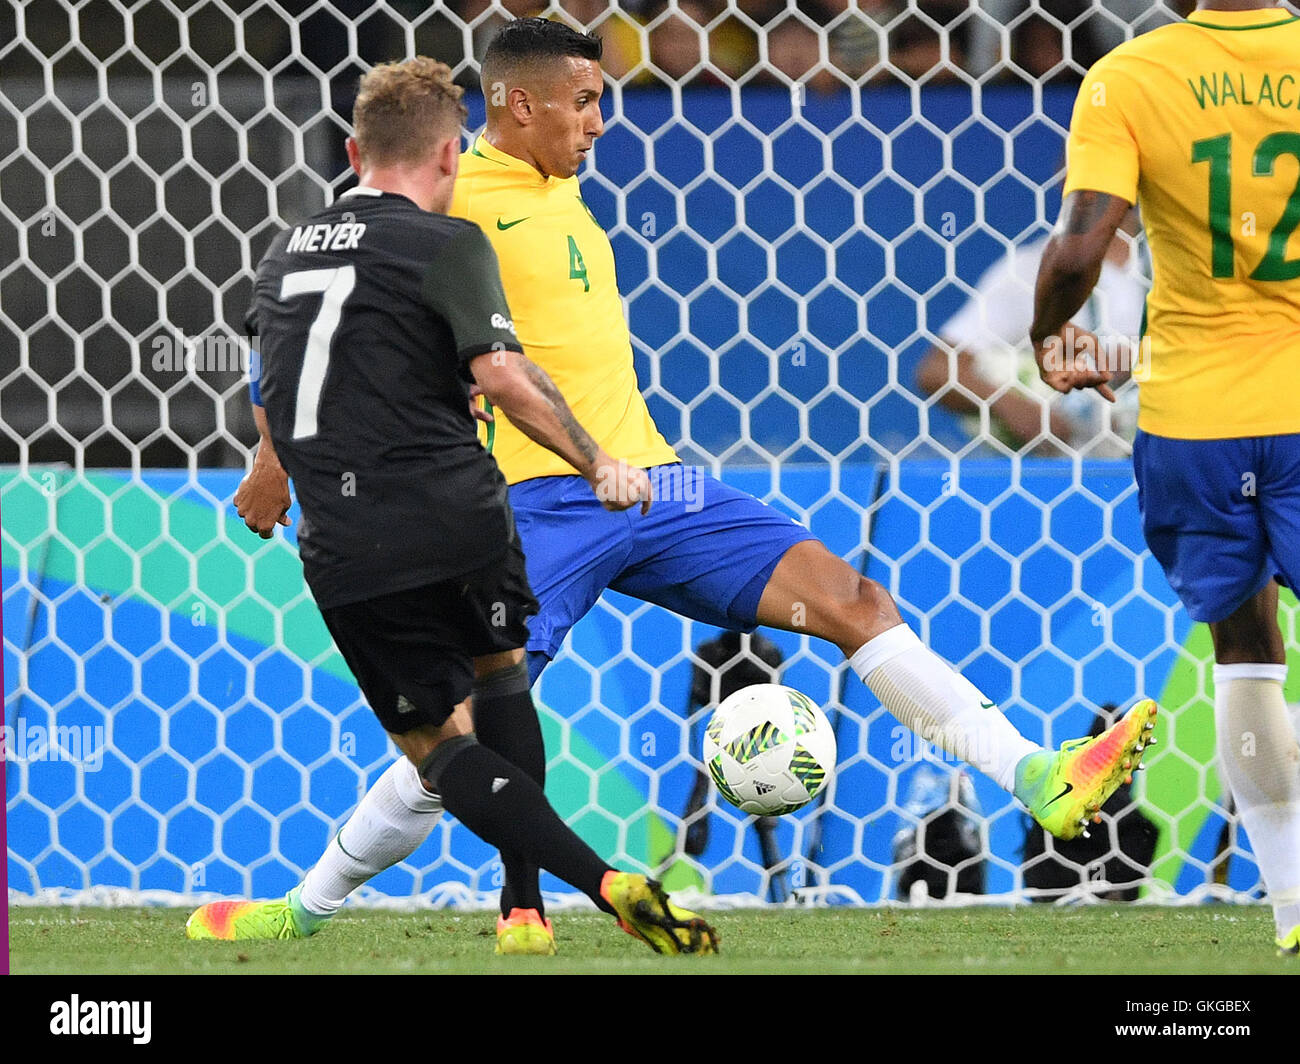 Rio de Janeiro, Brazil. 20th Aug, 2016. Maximilian Meyer of Germany scores the 1-1 equalizer as Marquinhos of Brazil is tunneled during the Men's soccer Gold Medal Match between Brazil and Germany during the Rio 2016 Olympic Games at the Maracana in Rio de Janeiro, Brazil, 20 August 2016. Photo: Soeren Stache/dpa (re-crop)/dpa/Alamy Live News Stock Photo